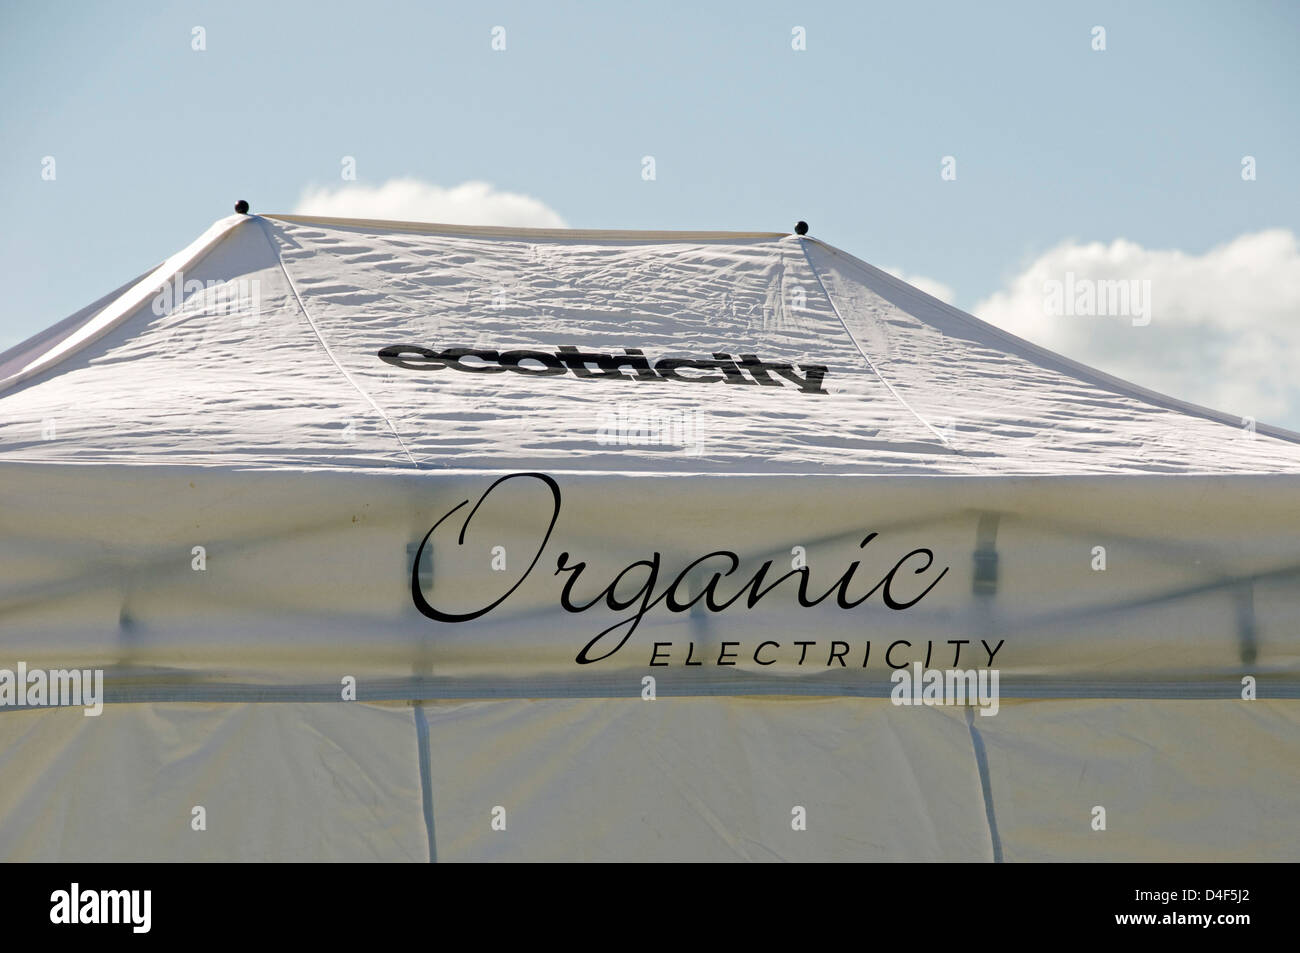 Ecotricity -Organic Electricity printed on tent, Camden now London Green Fair, England UK Stock Photo